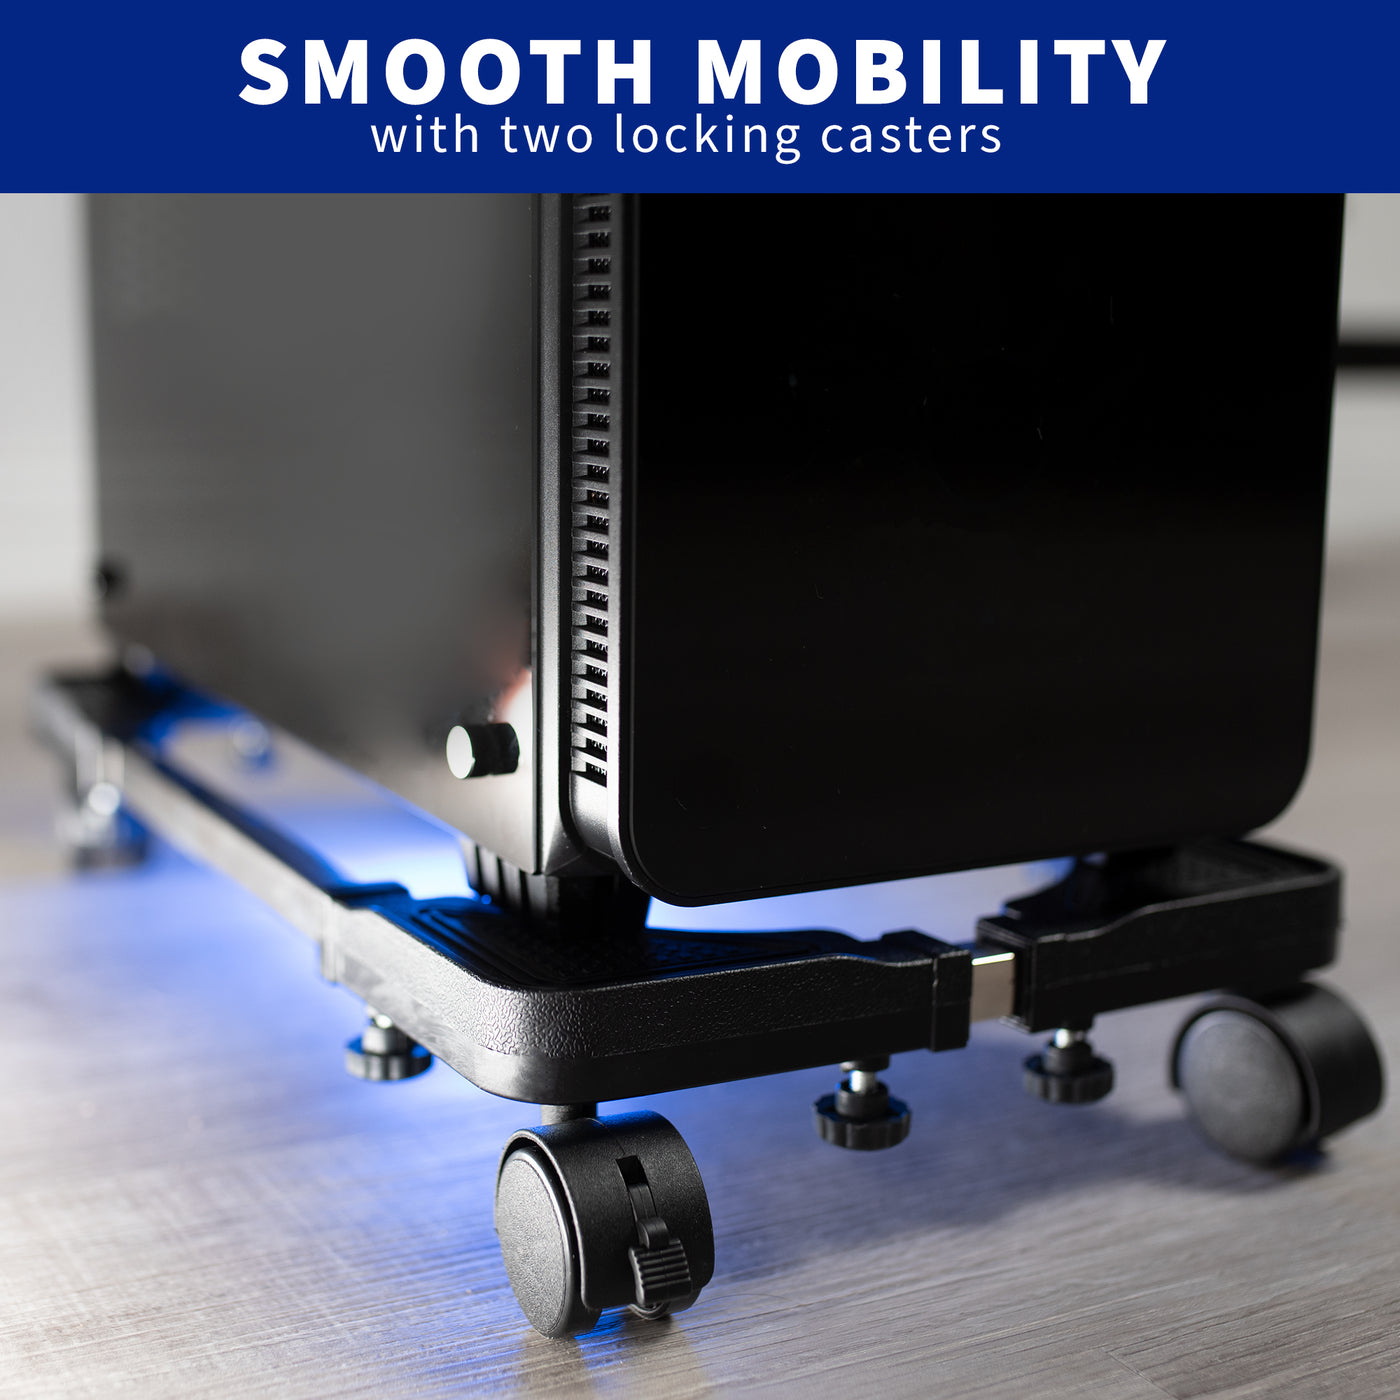 This PC cart / CPU trolley raises your PC off of the ground and makes it easily mobile.